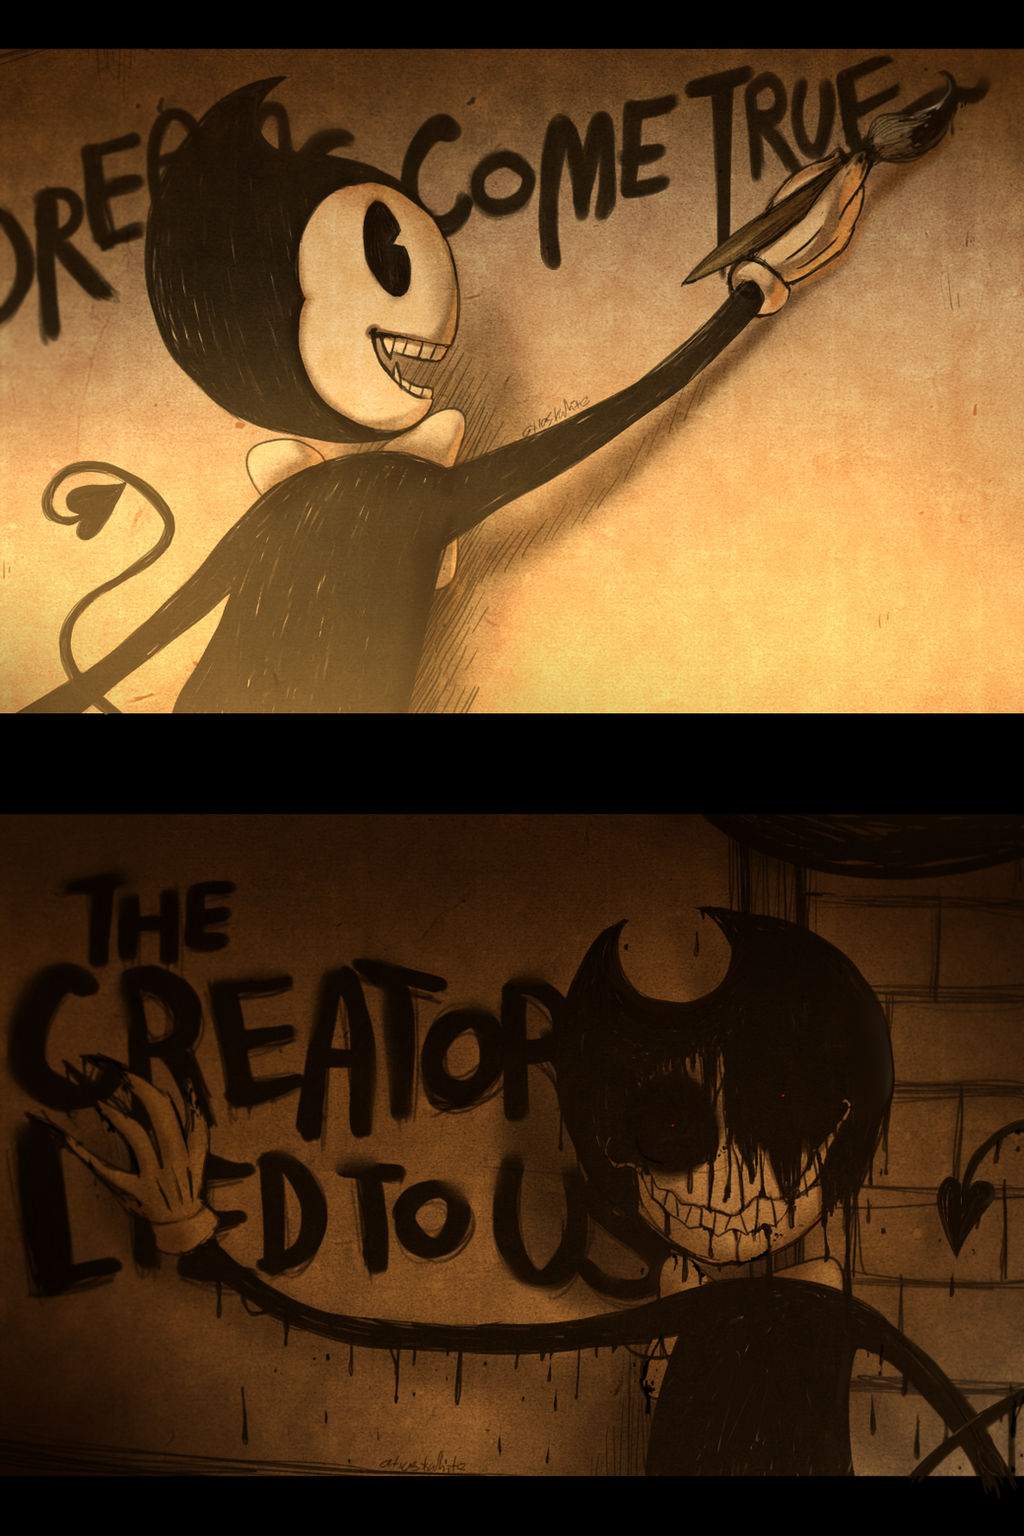 Bendy and the Ink Machine II by Atlas-White on DeviantArt